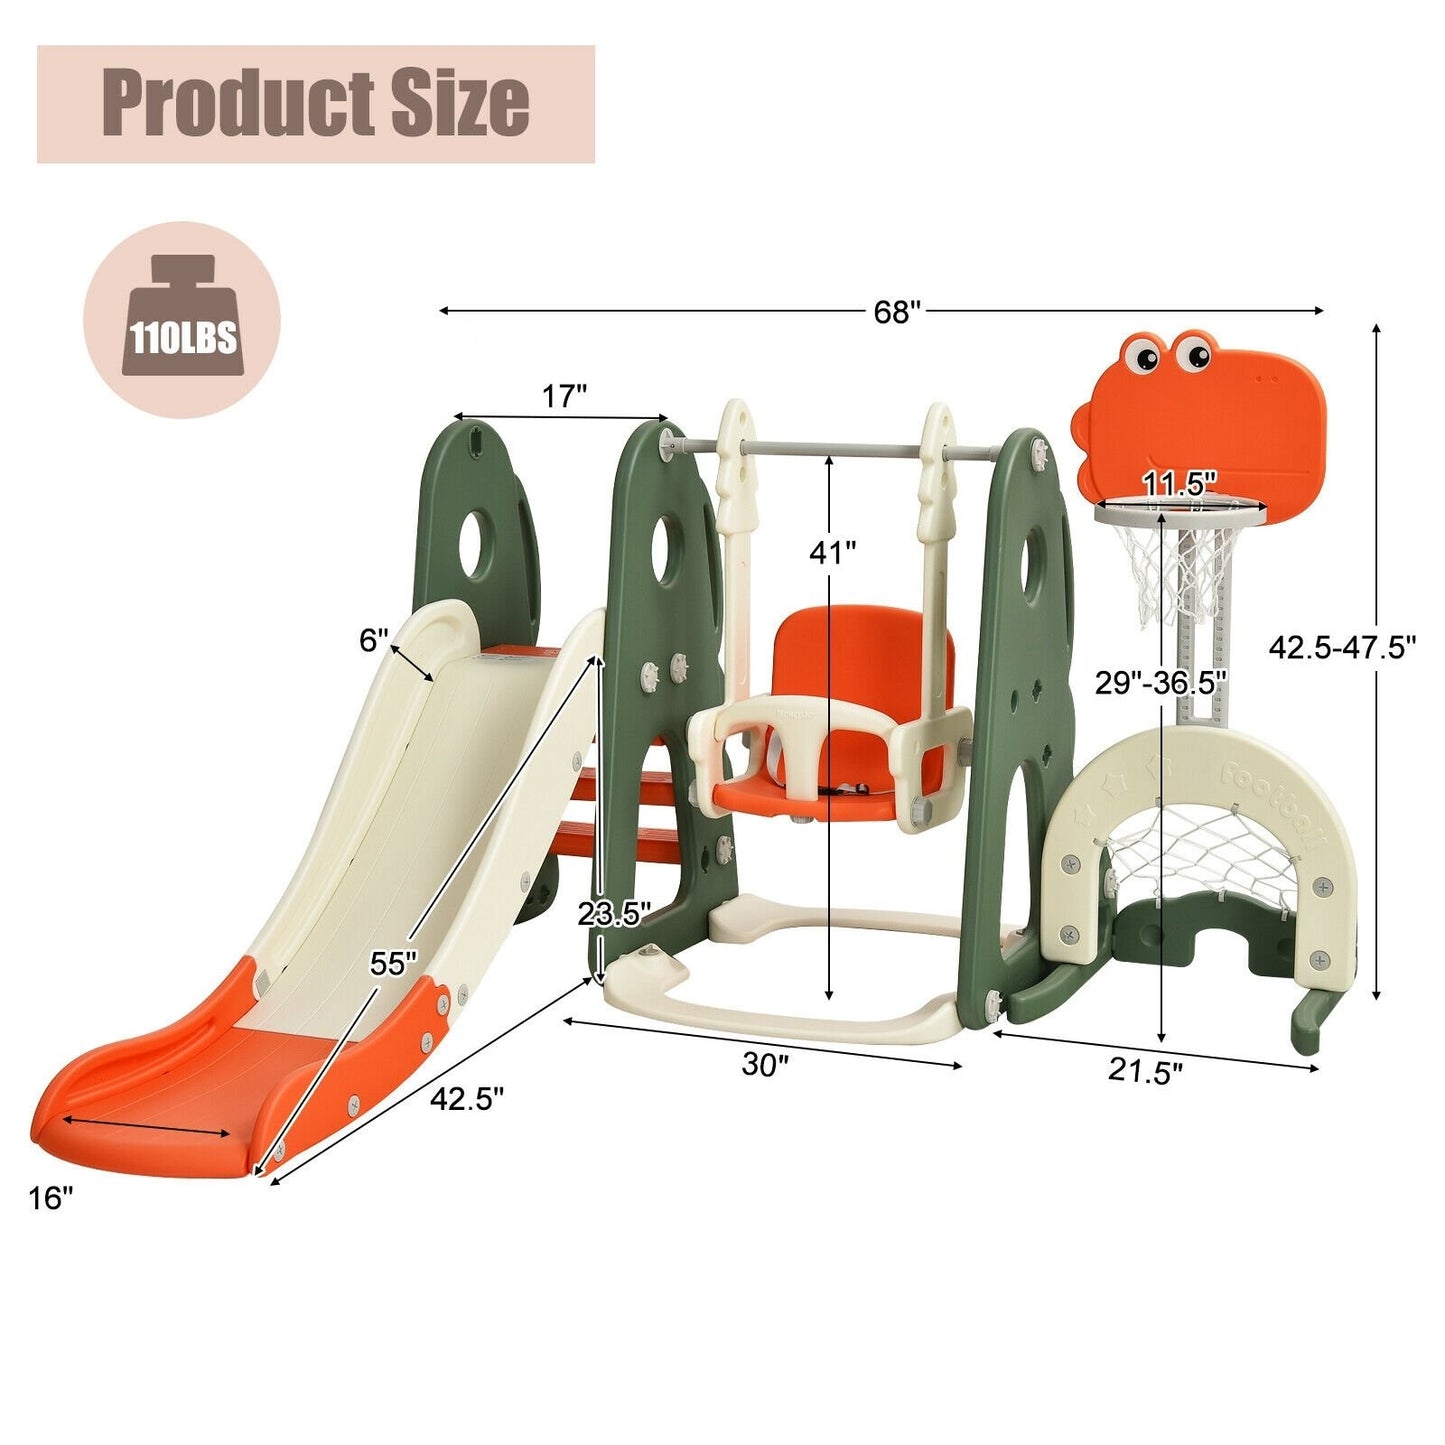 6 in 1 Toddler Slide and Swing Set with Ball Games, Orange at Gallery Canada